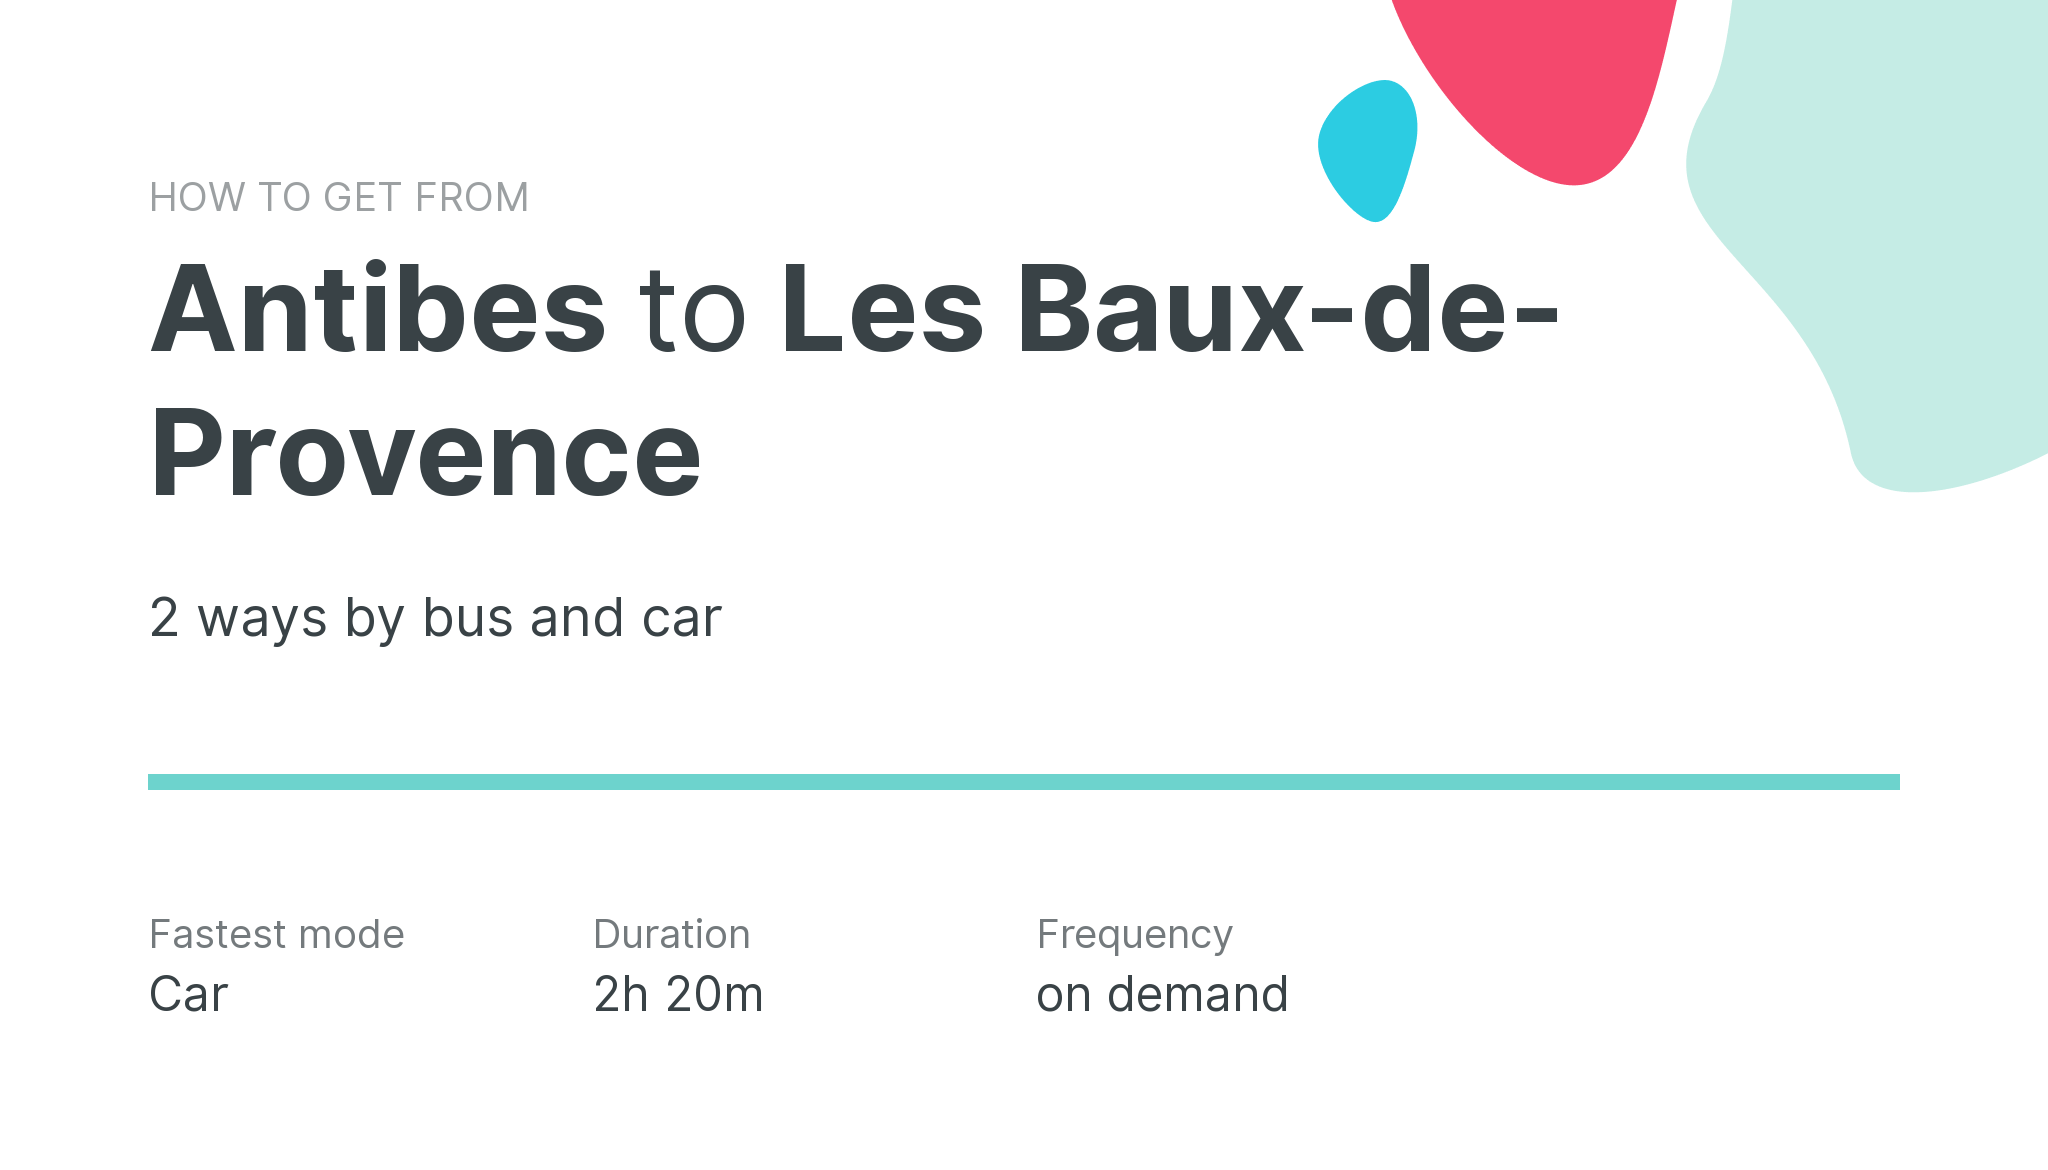 How do I get from Antibes to Les Baux-de-Provence